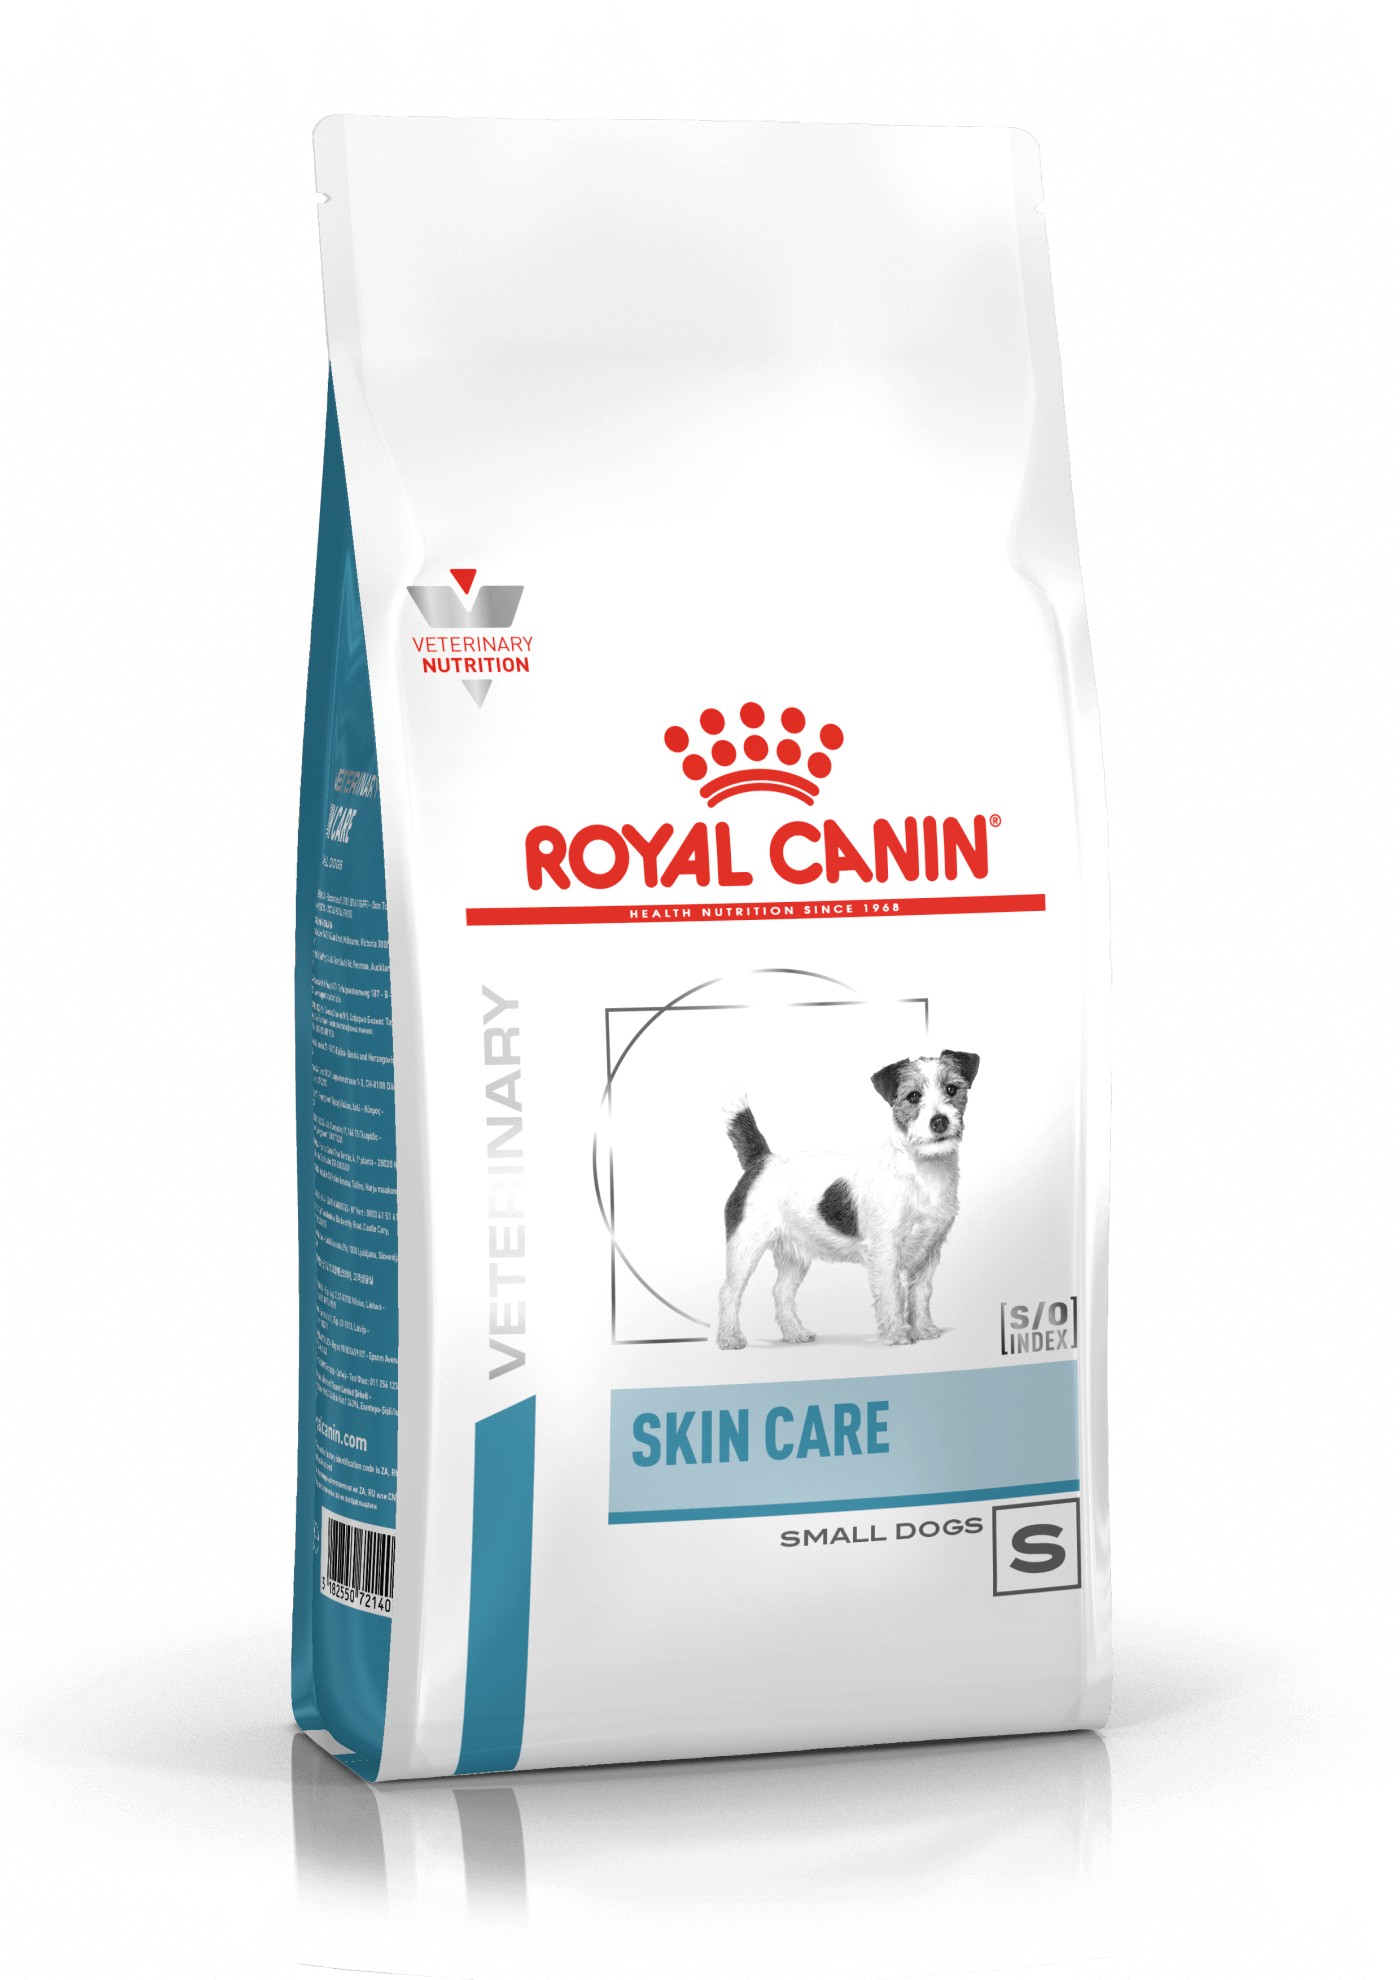 Royal Canin Veterinary Diet Skin Care Small Dog